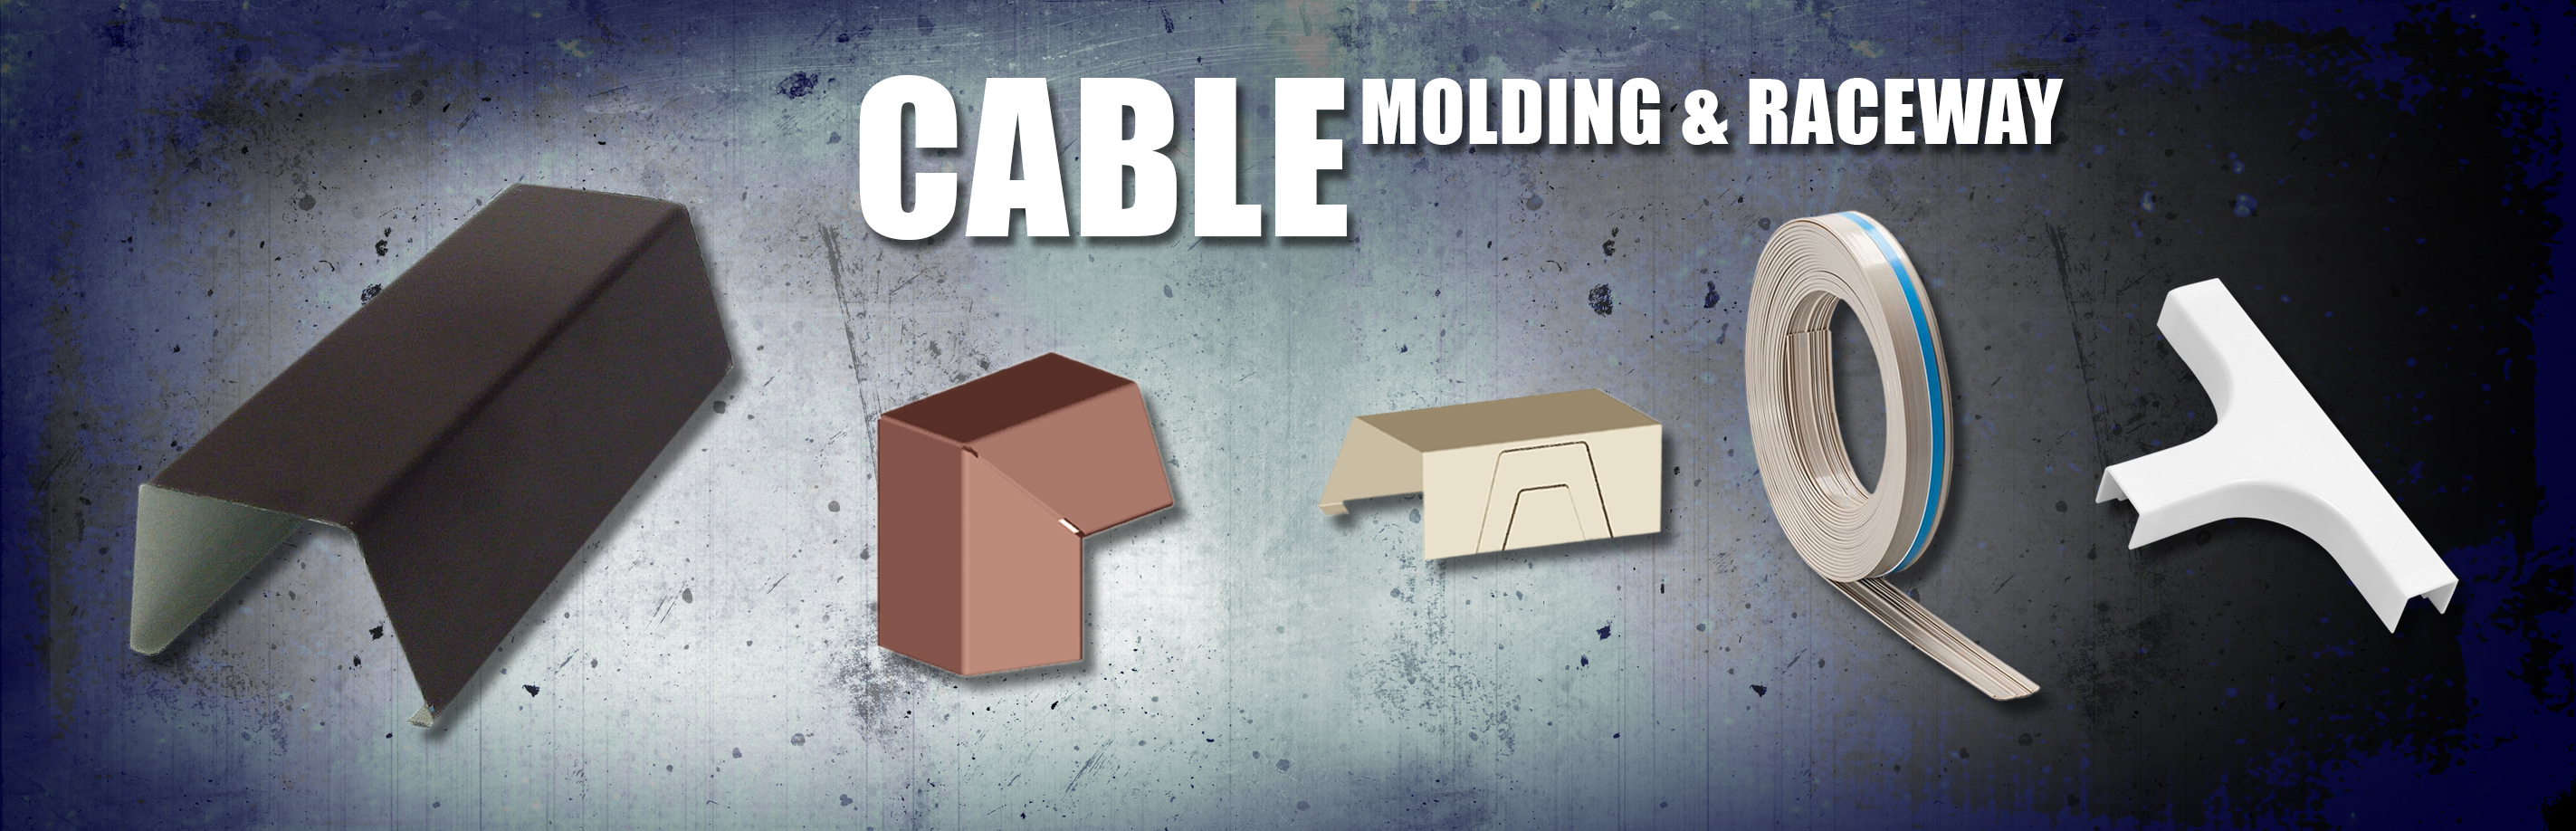 Cable Molding